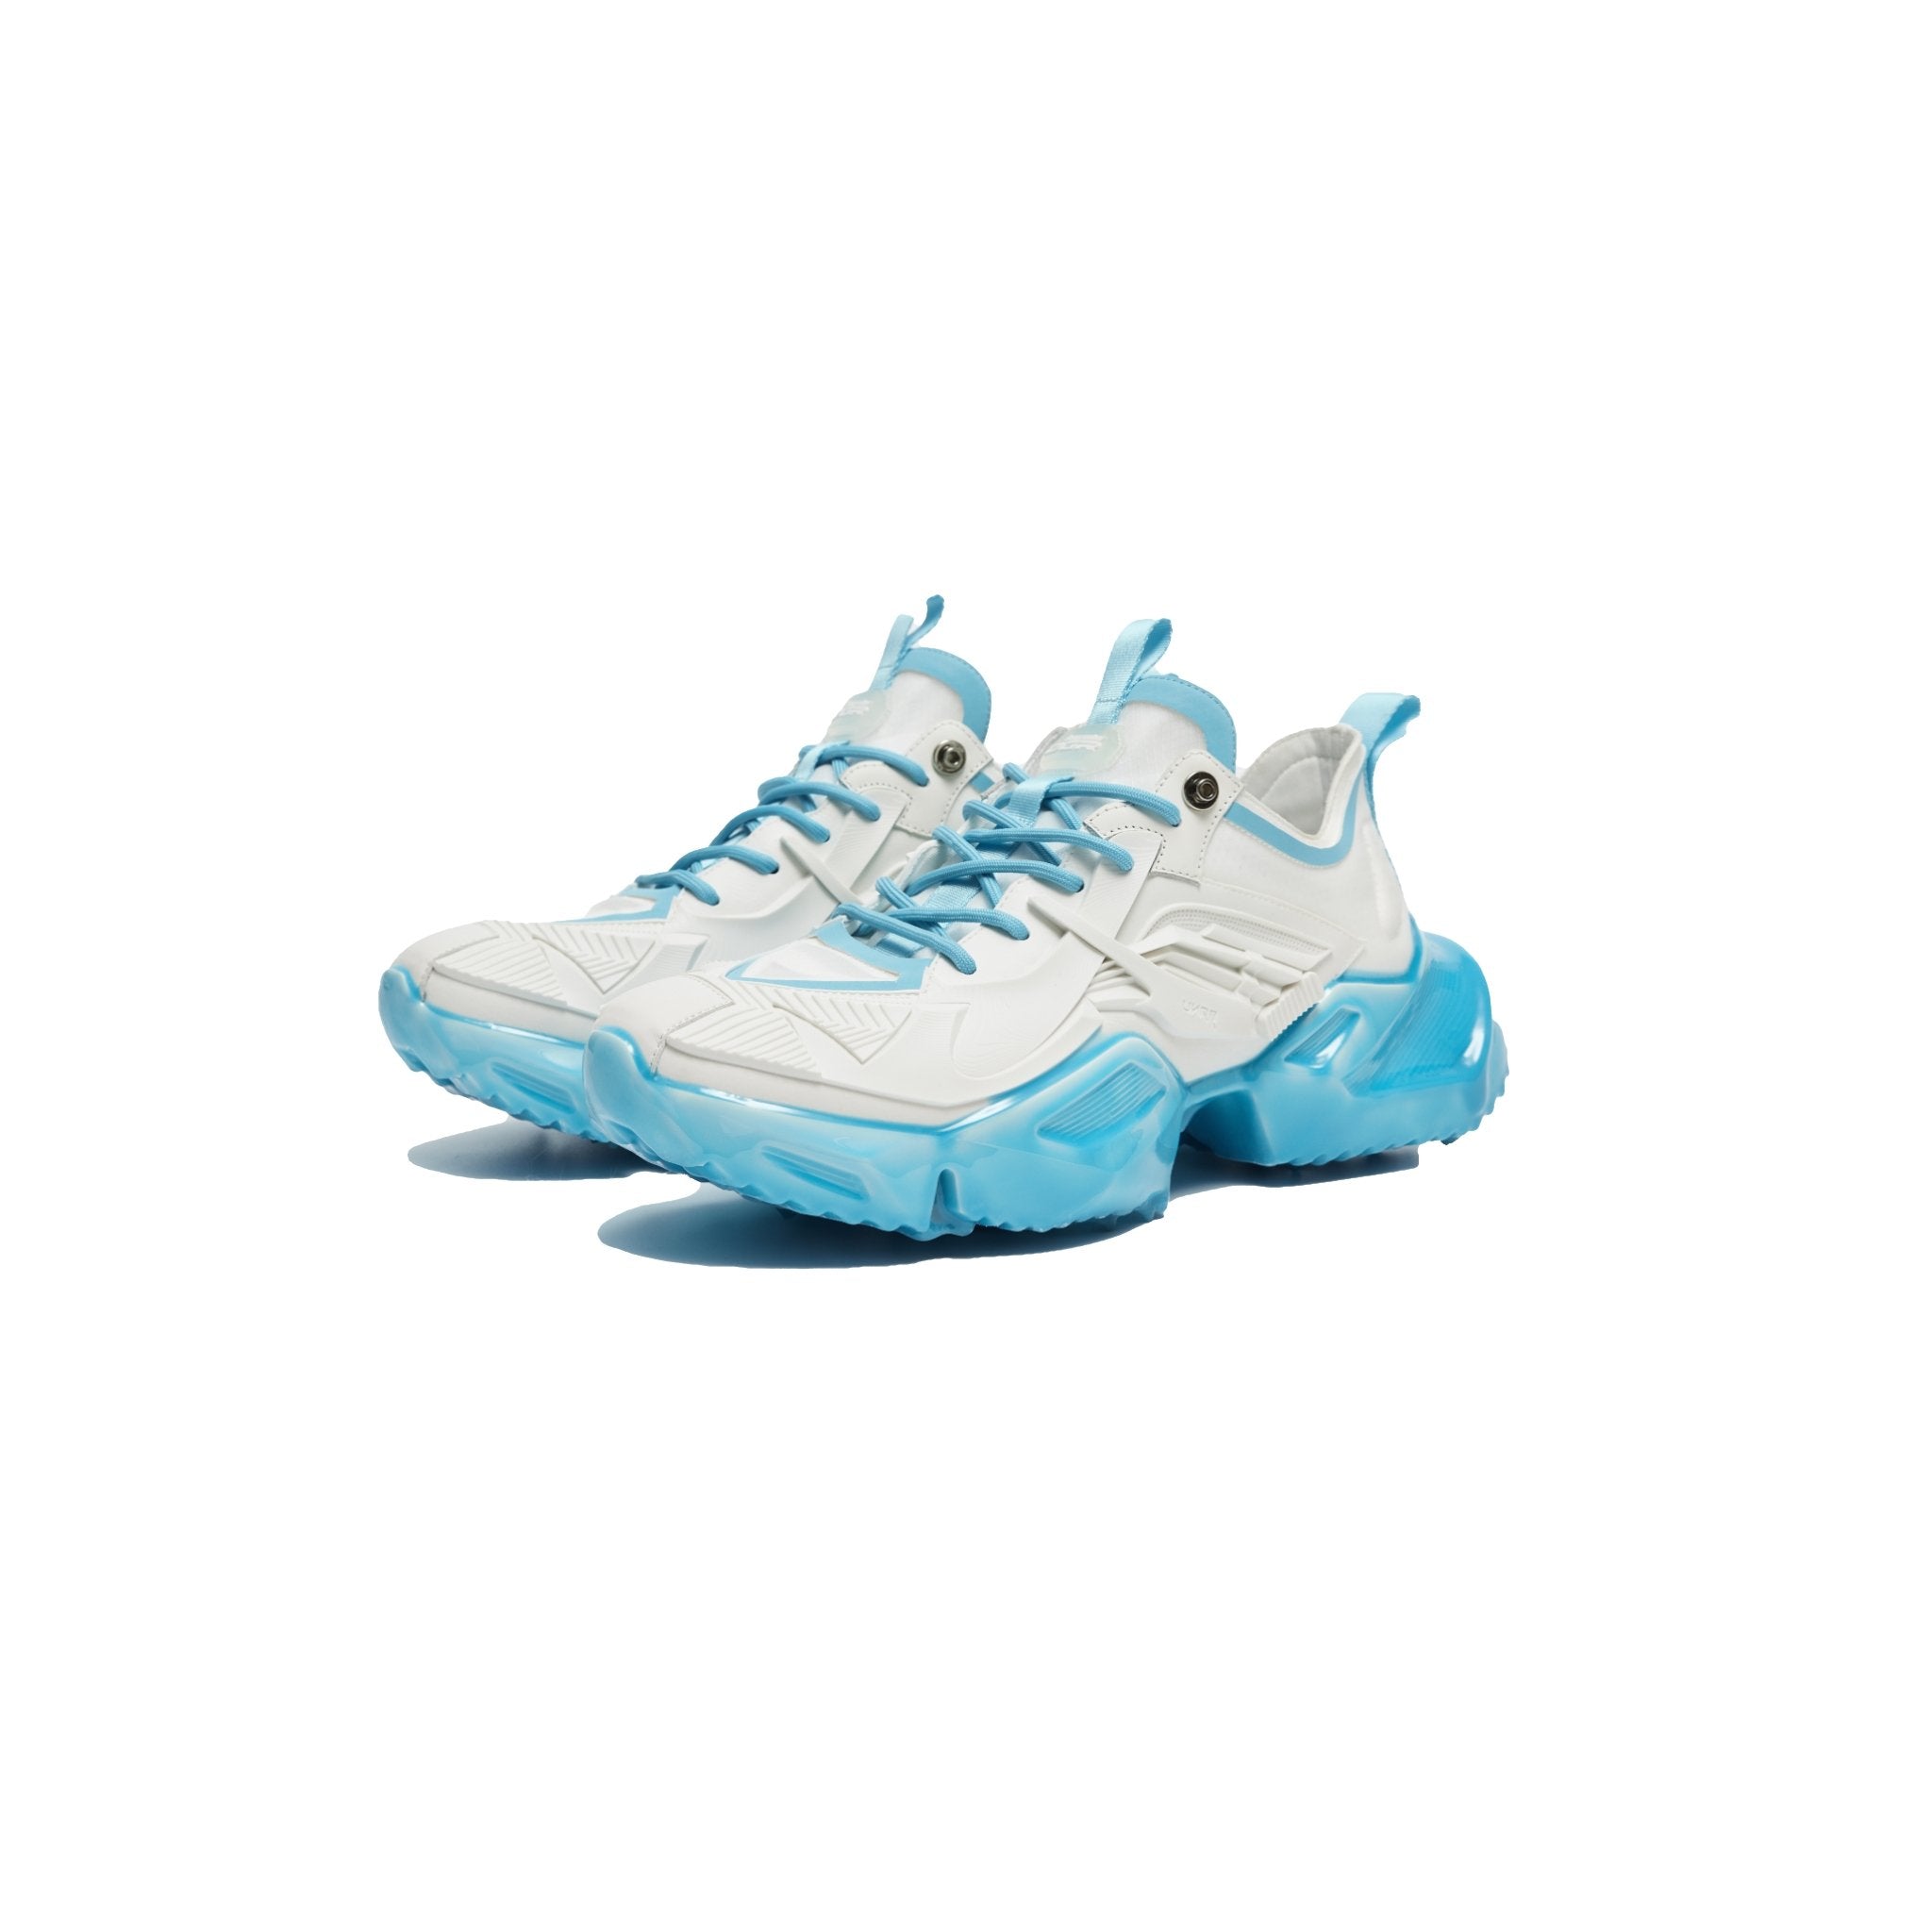 OGR MECHA Rong Classic 3D Sneaker Glacier Blue | MADA IN CHINA